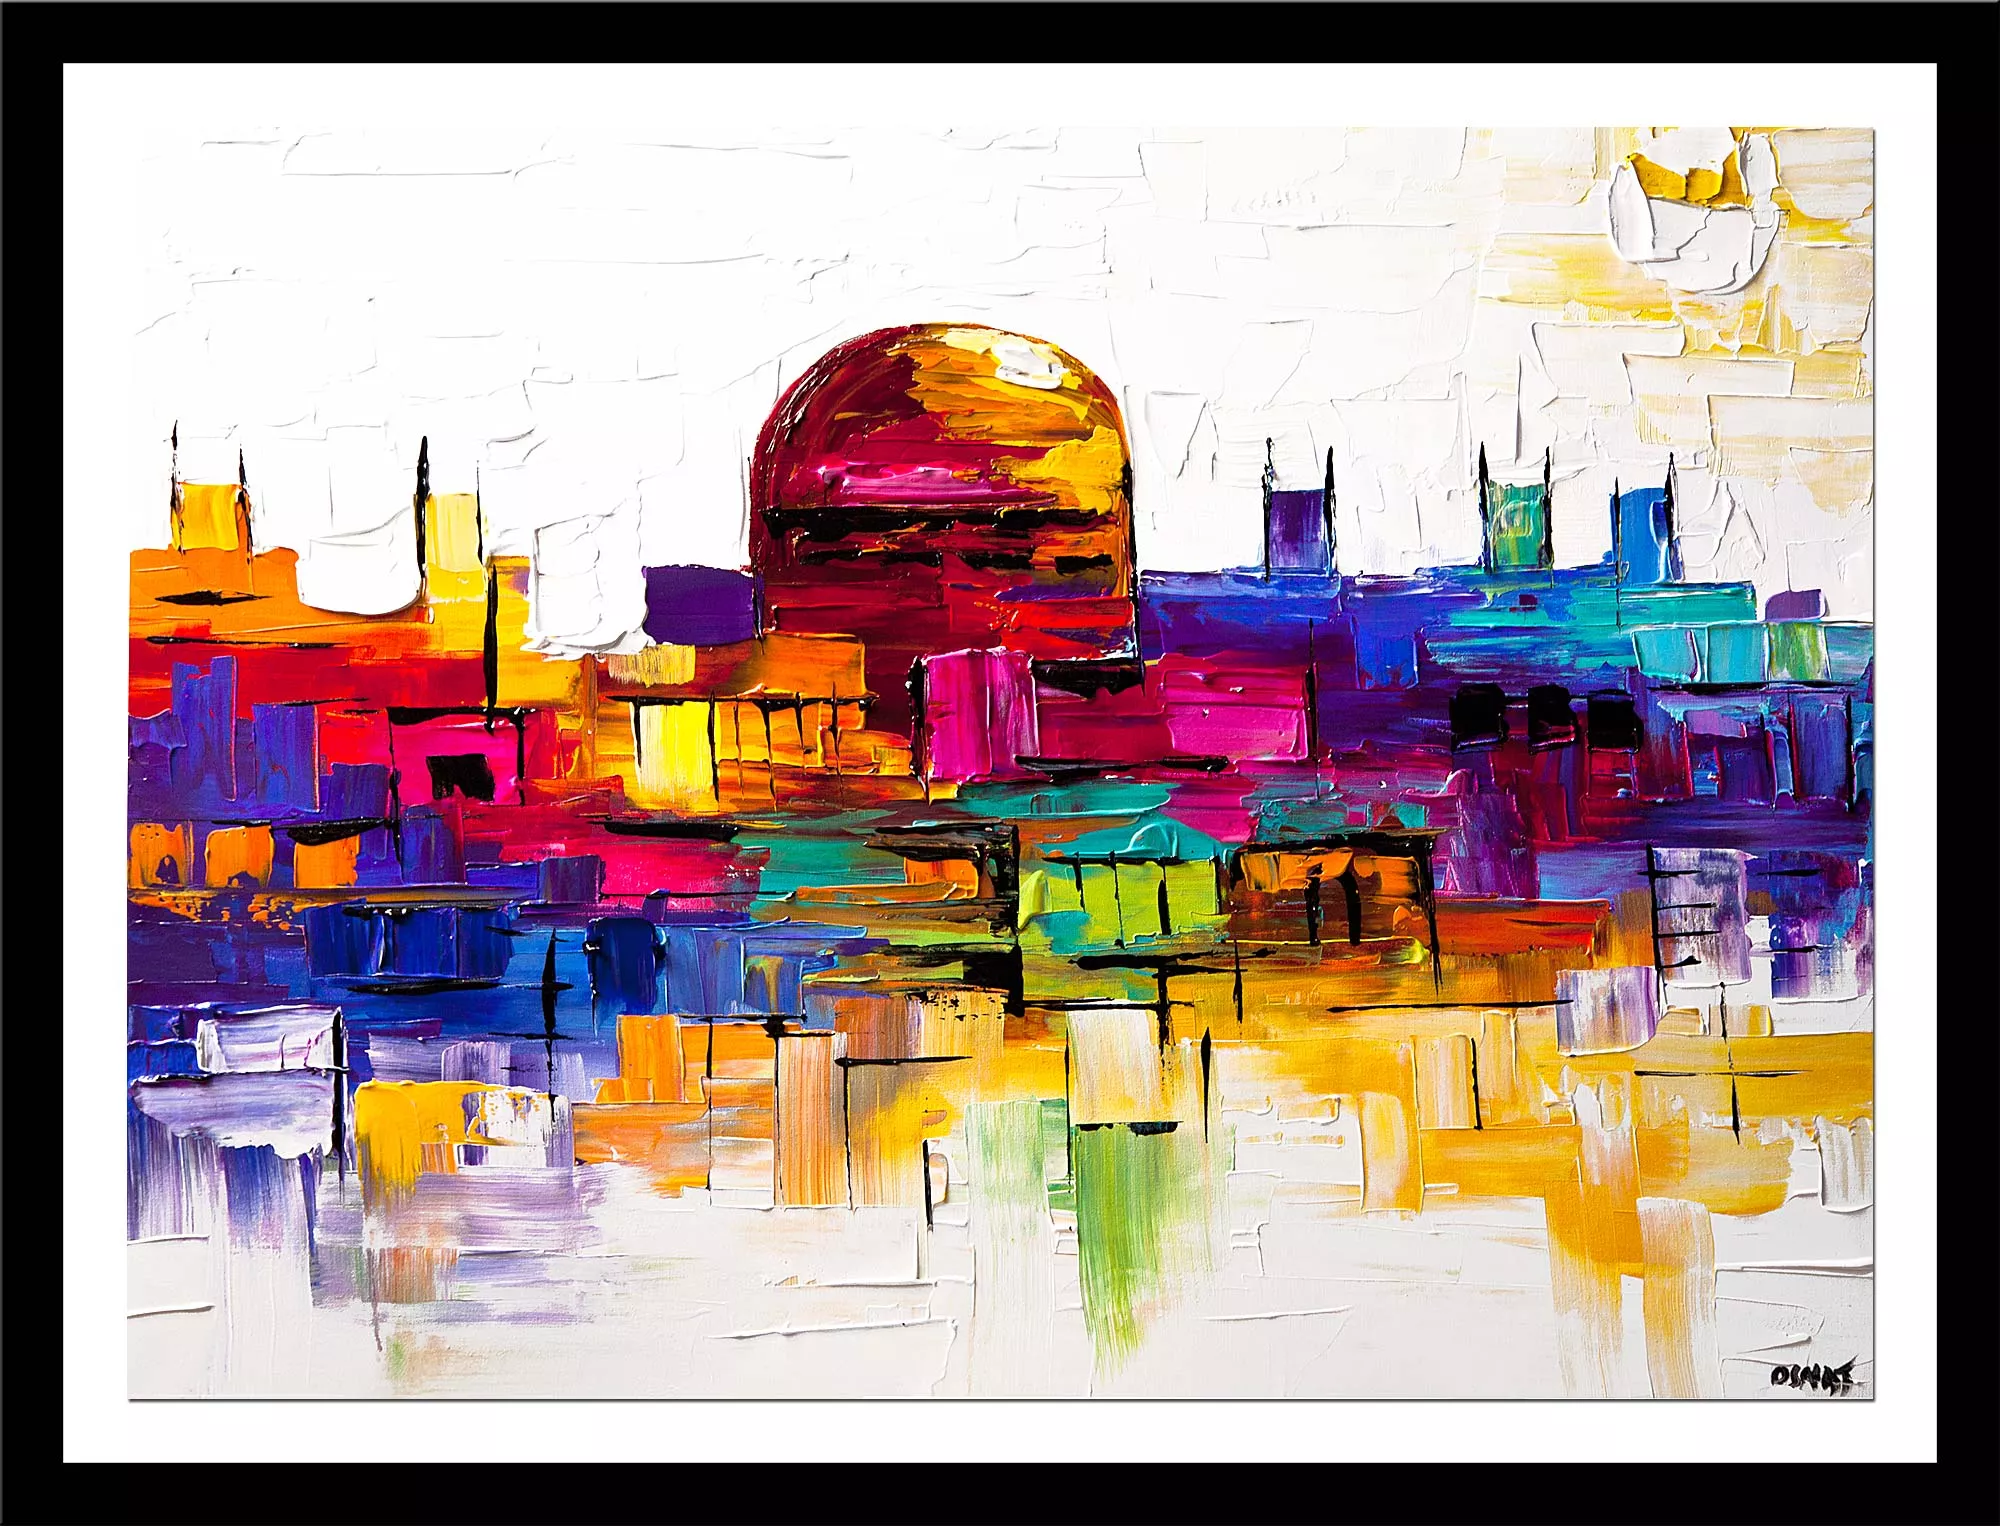 posters on paper - canvas print of colorful painting of jerusalem golden dome